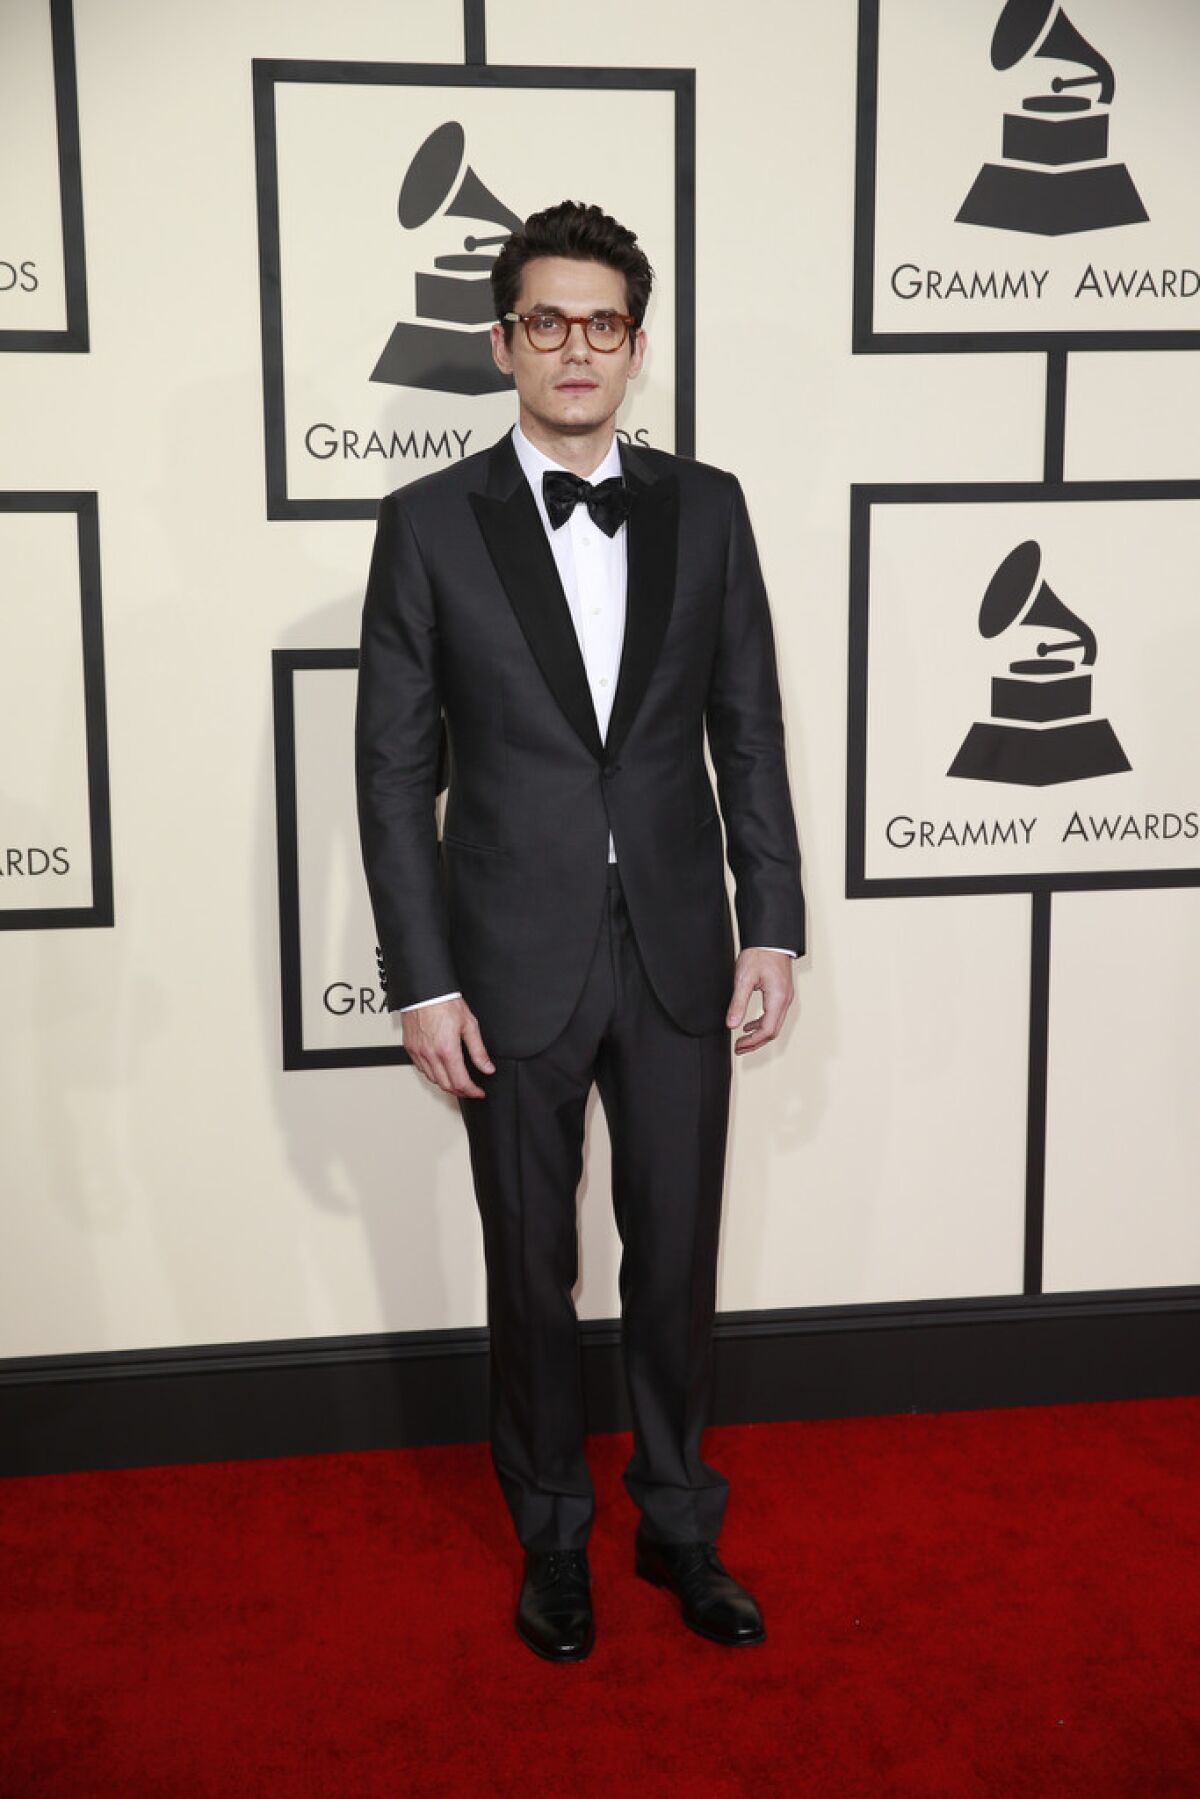 John Mayer during the arrivals at the 57th Annual Grammy Awards at Staples Center in Los Angeles on Feb. 8, 2015. (Allen J. Schaben / Los Angeles Times)